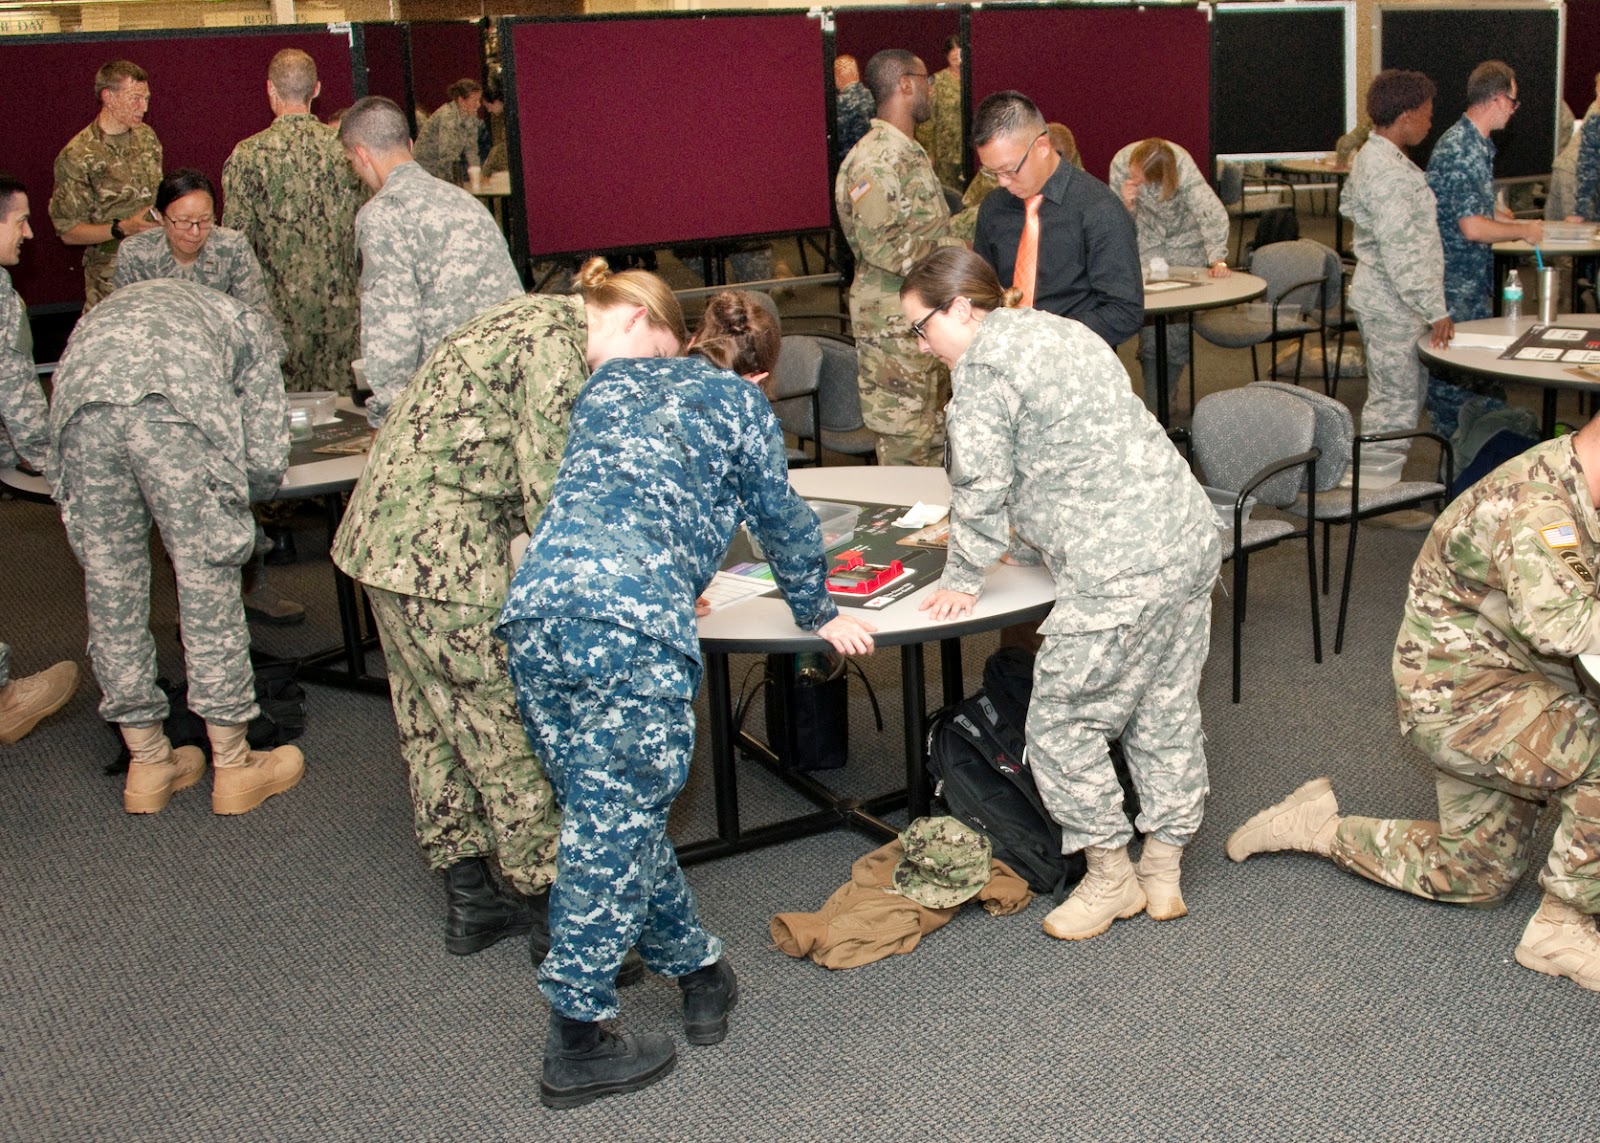 Fourth-year military medical students gather around several tables with game pieces and boards. They discuss and write things down.